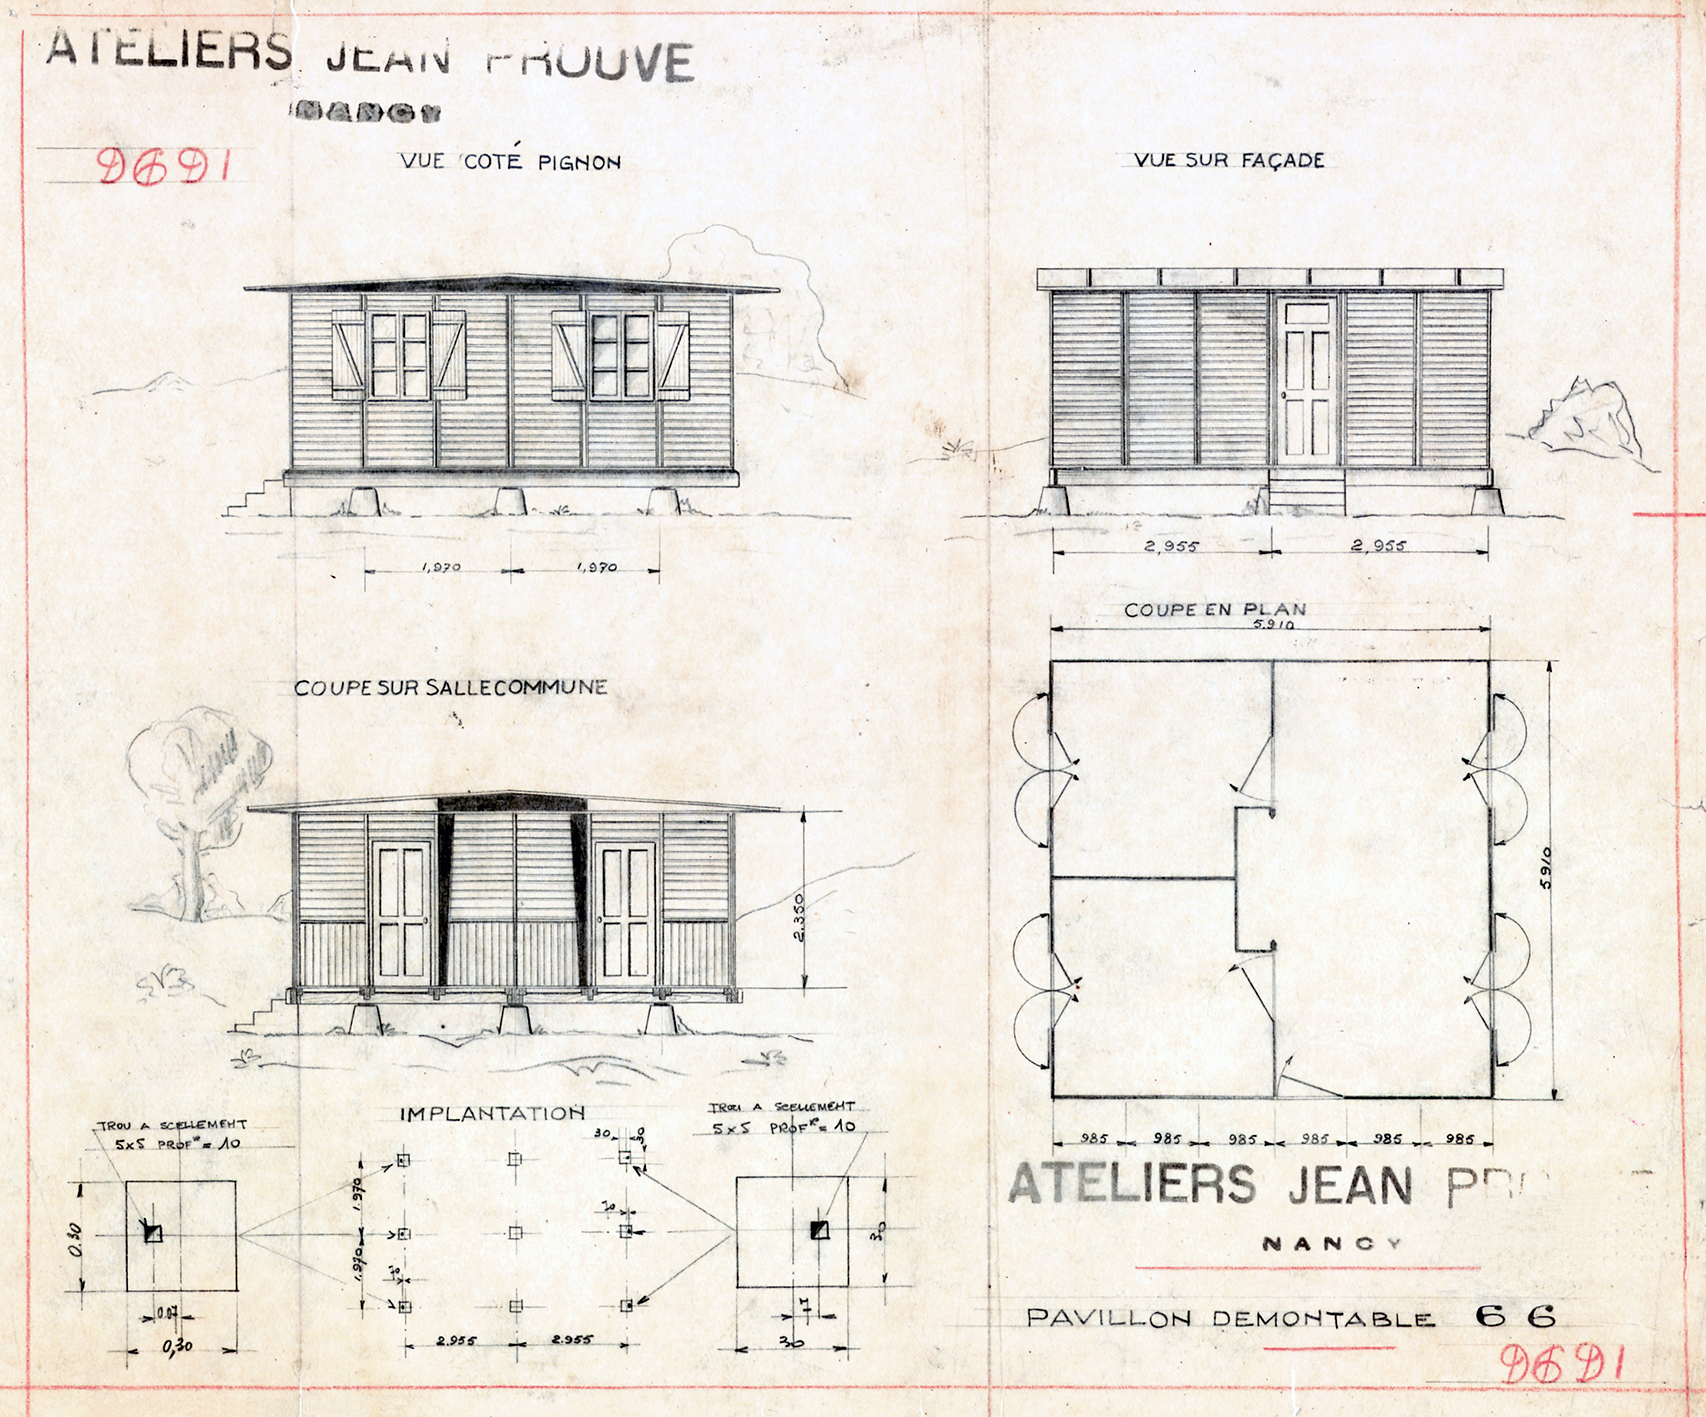 Ateliers Jean Prouvé. “Demountable house 6x6”, presentation drawing, no. 9691, May 1945.